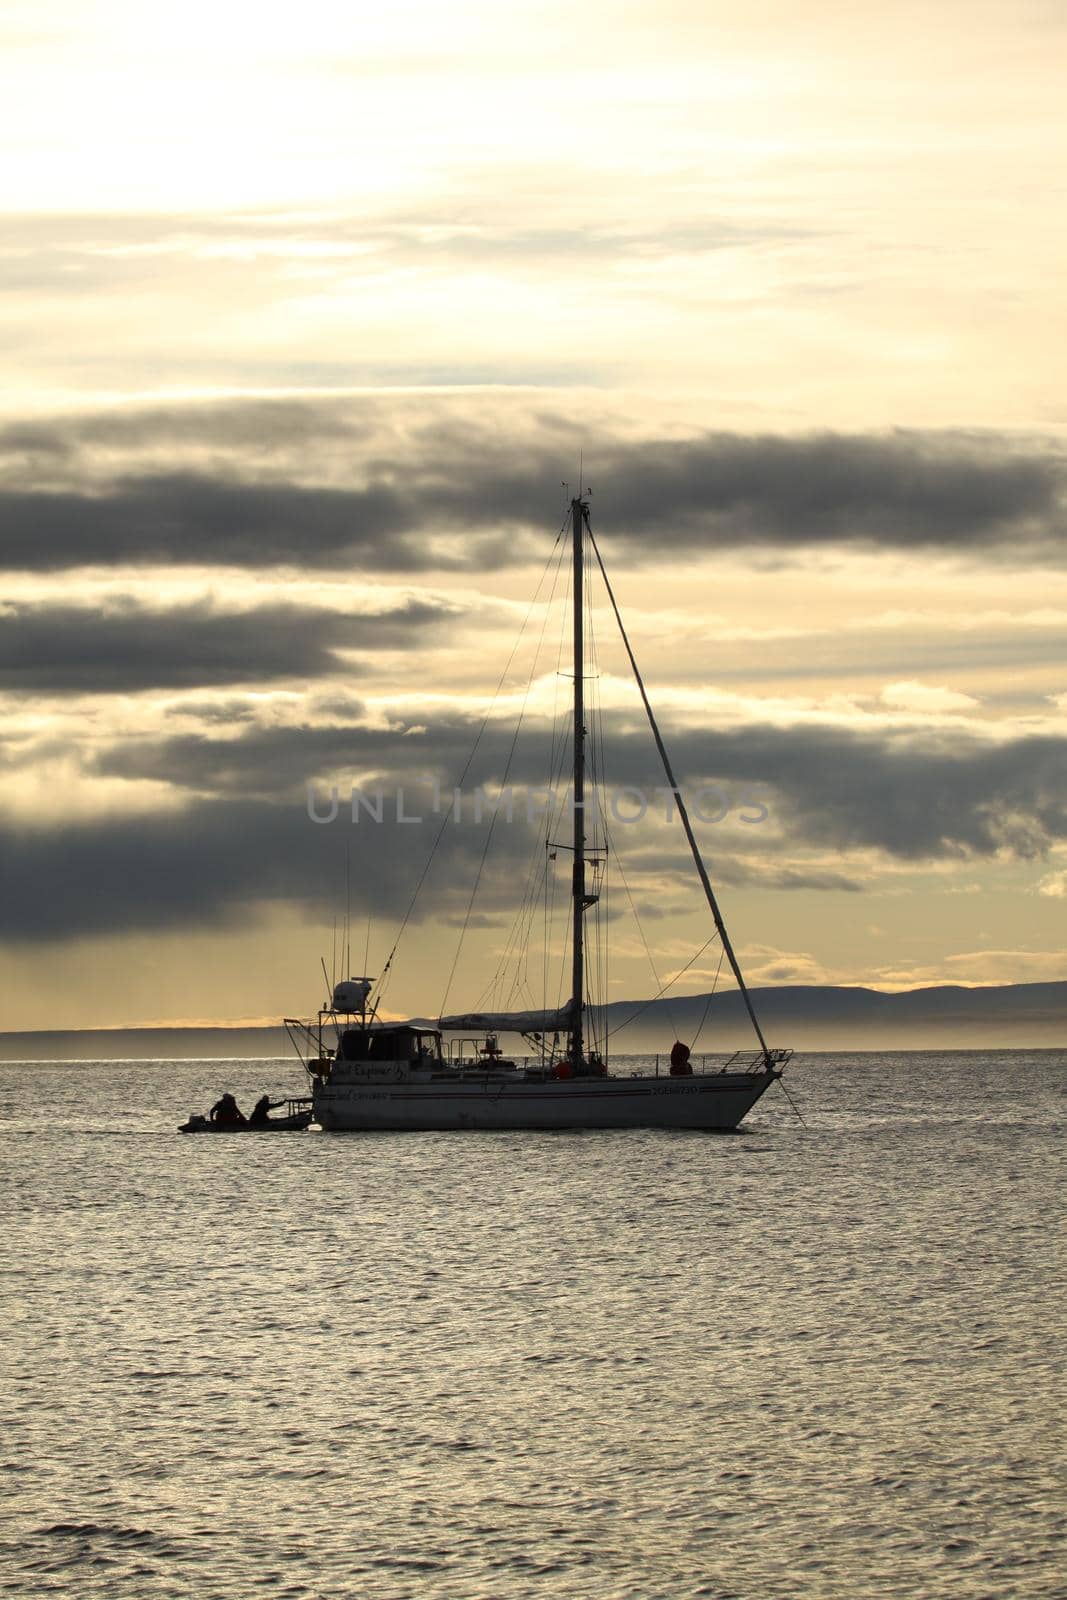 A sailboat anchored near Pond Inlet, Nunavut waiting for weather to transit through the Northwest Passage, Canada